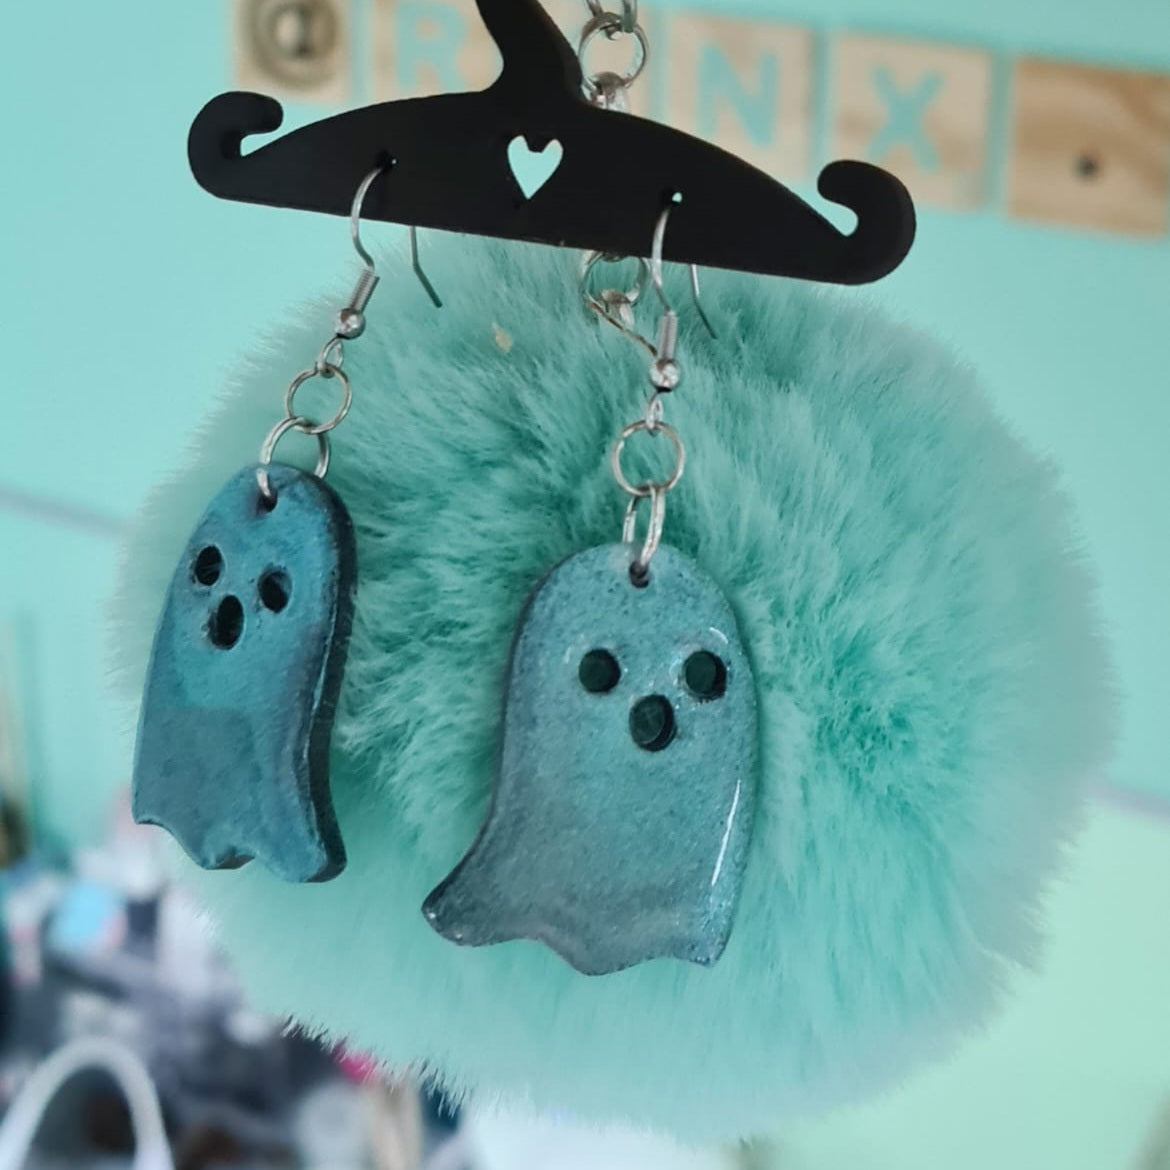 Ghost Earrings Silicone Resin Mould - Keipach